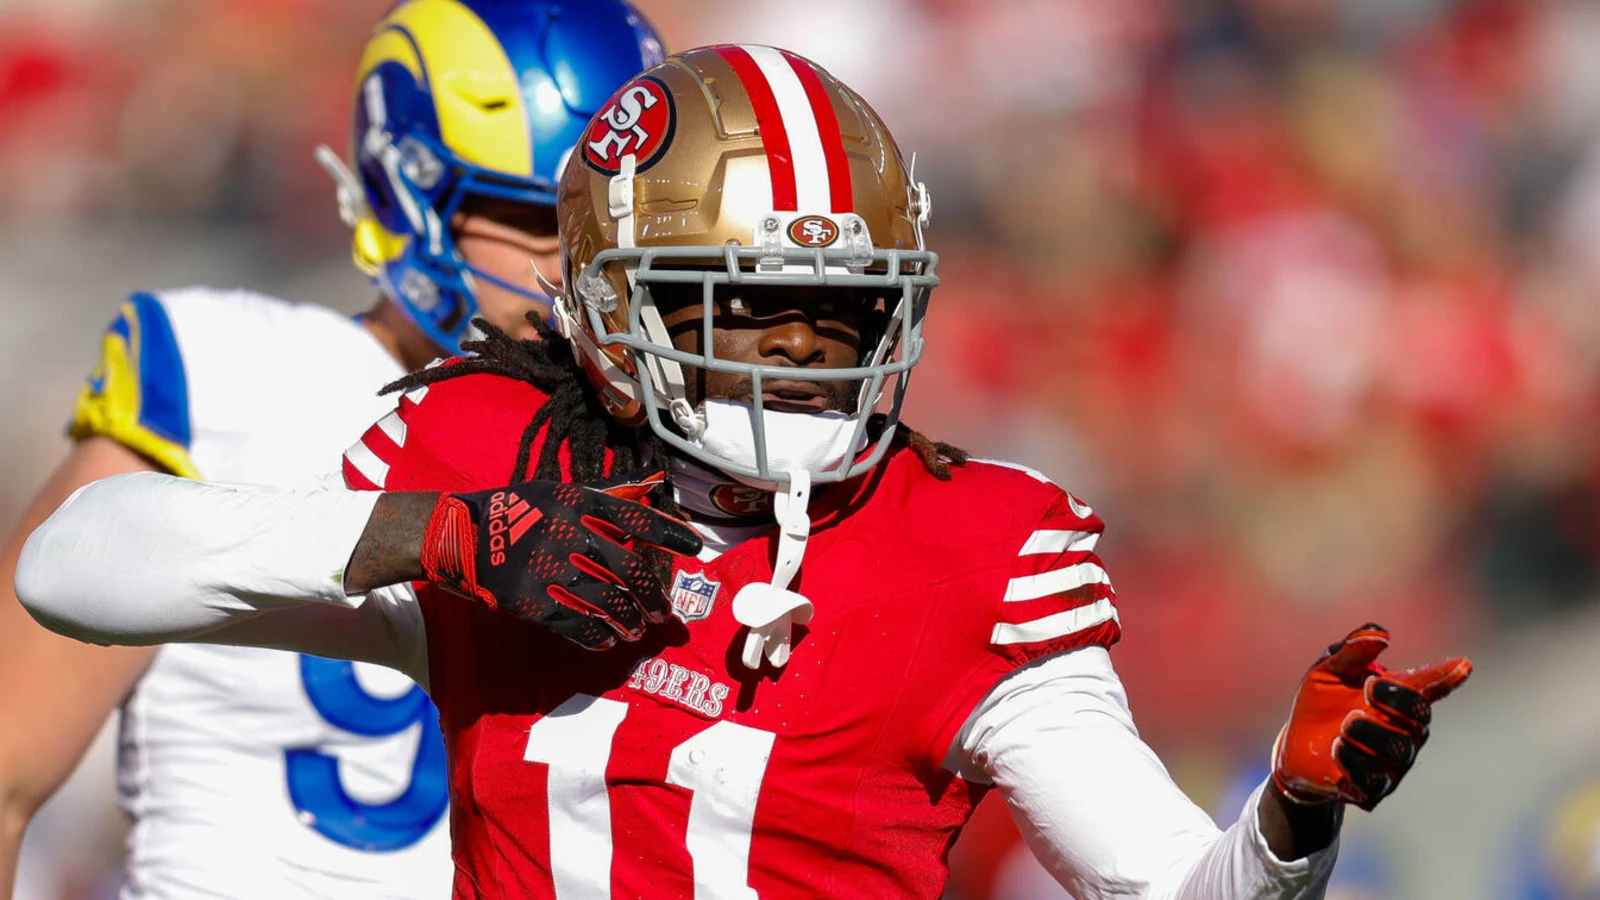  Will Brandon Aiyuk Catch a New Team? Top 4 NFL Spots Eyeing the 49ers' Rising Star